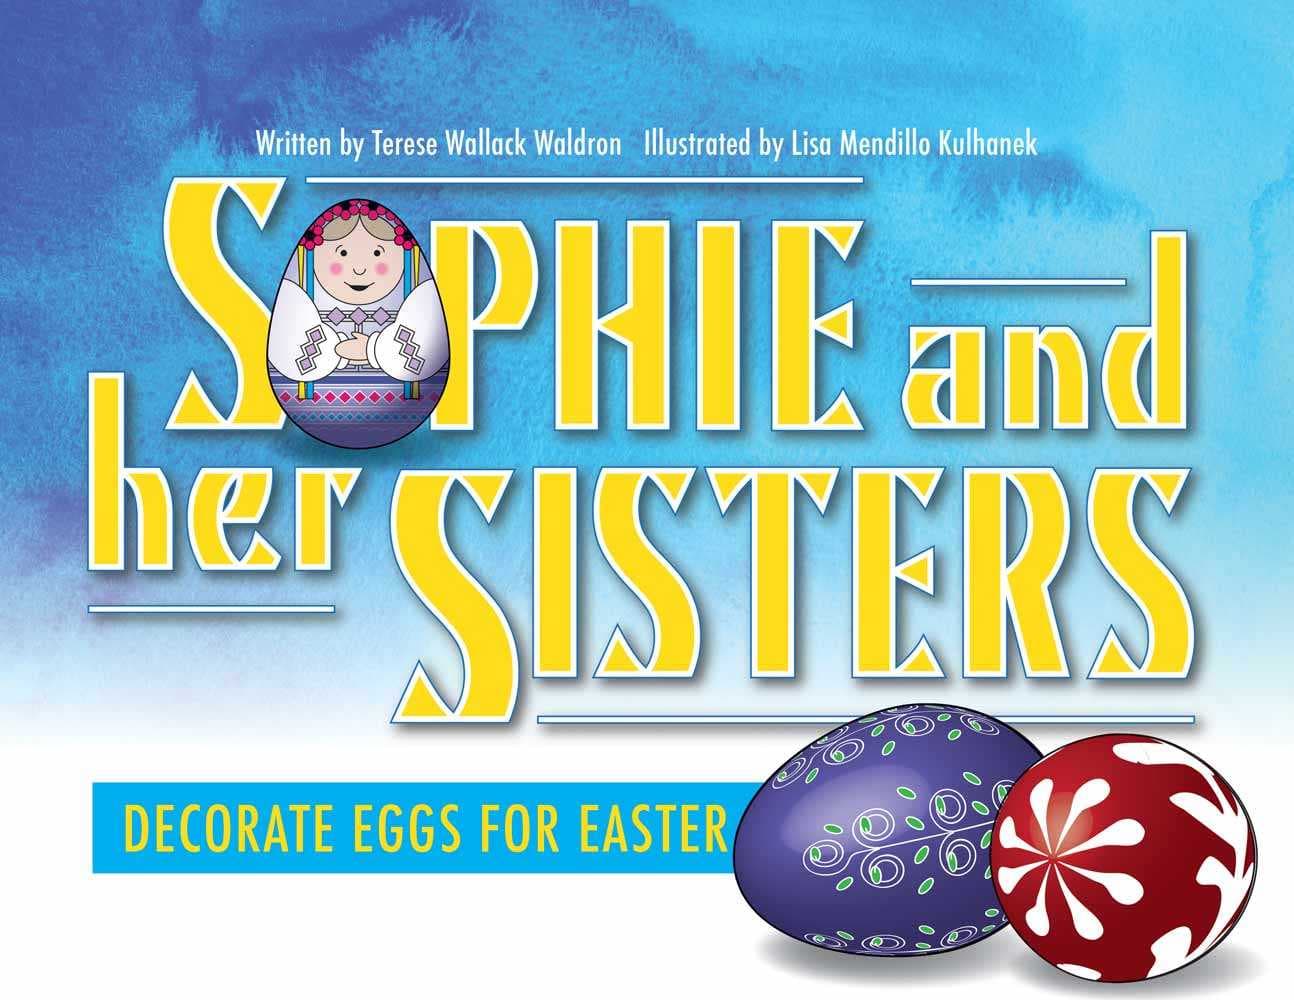 “Sophie and Her Sisters Decorate Eggs for Easter” book cover